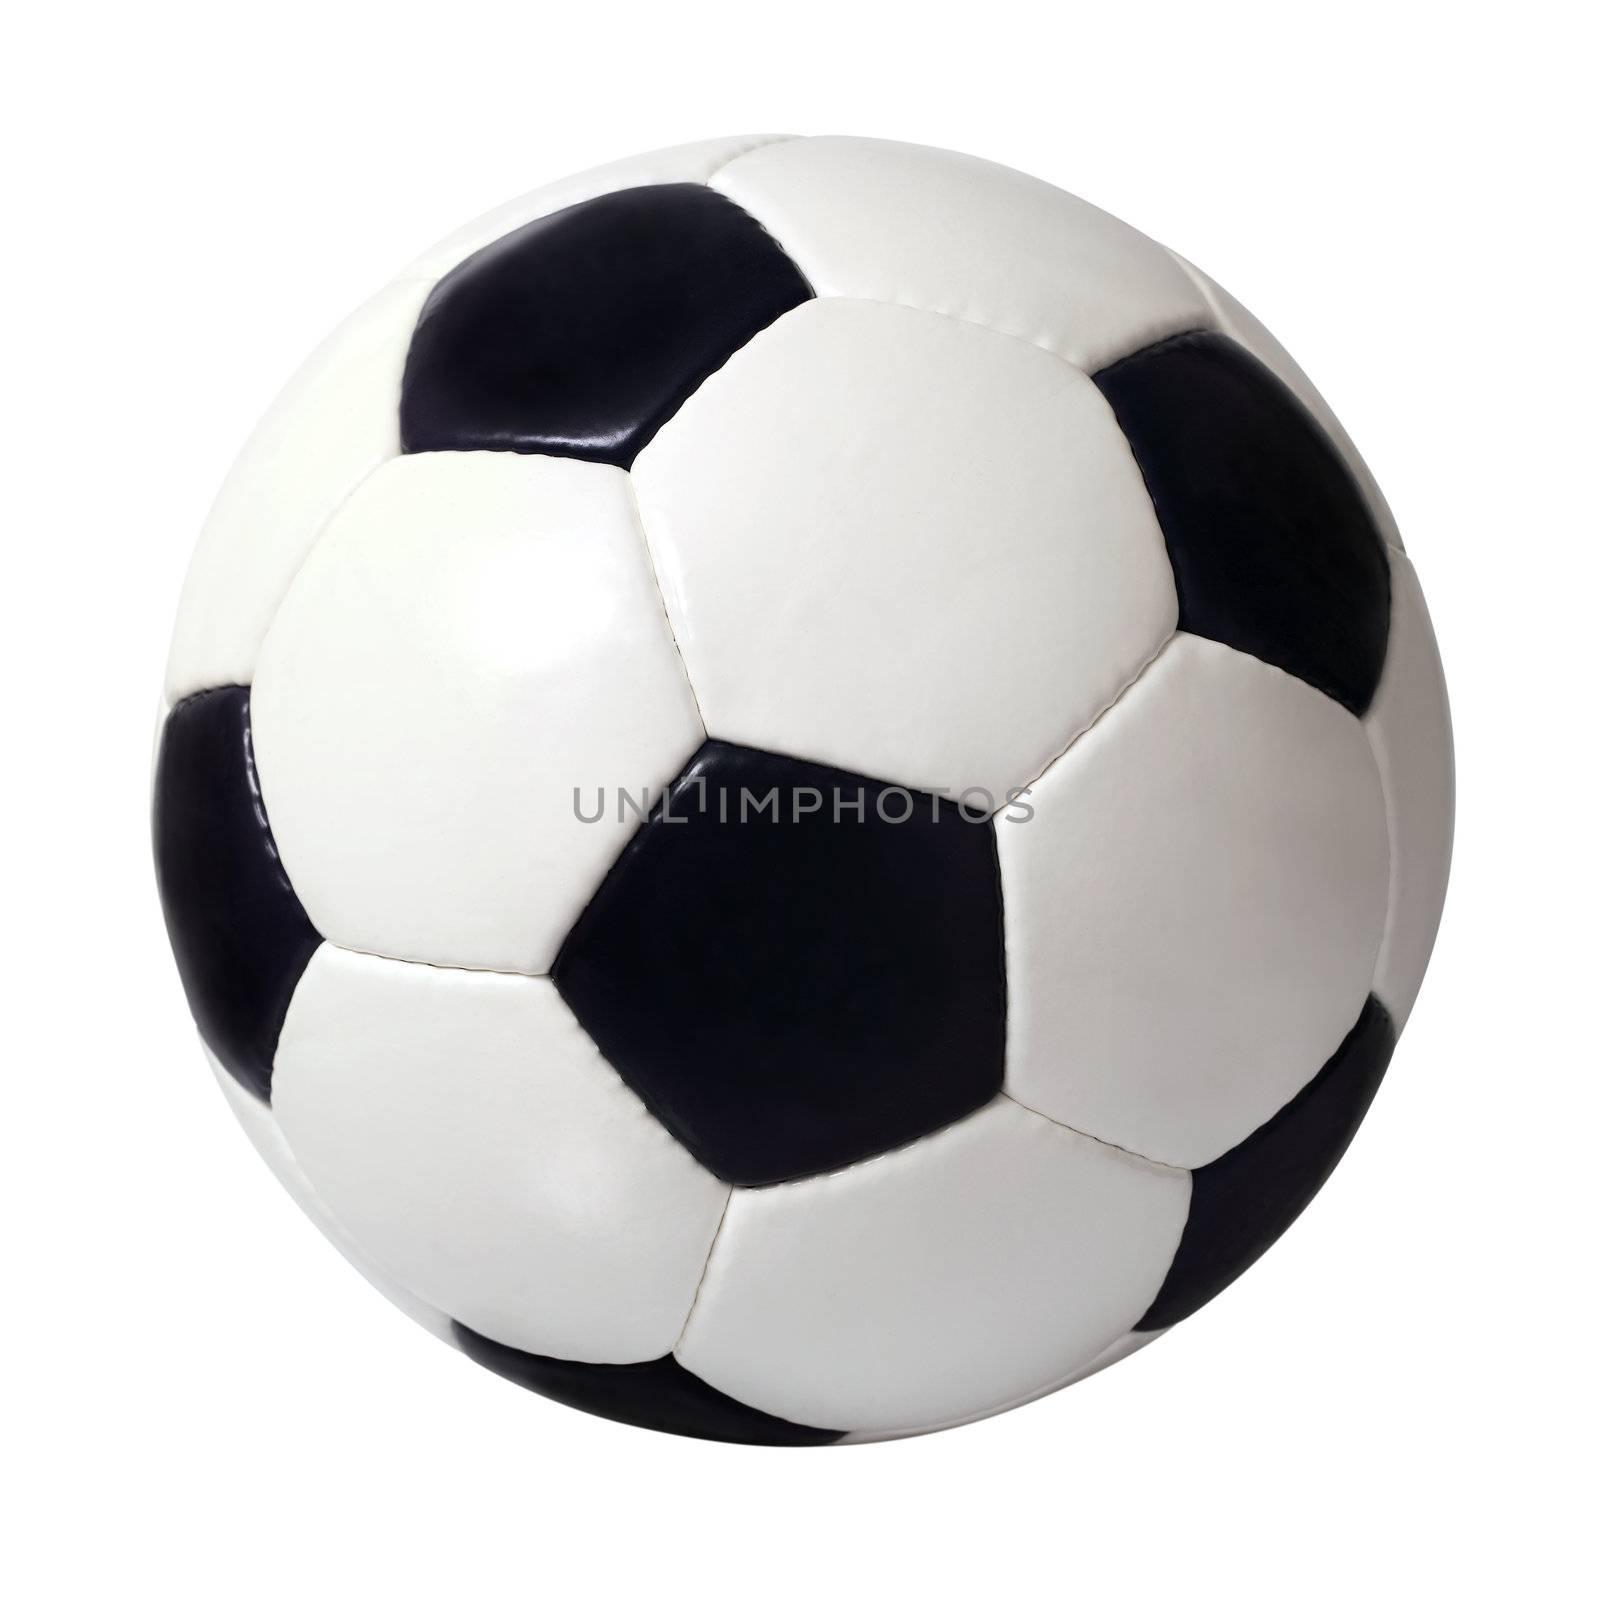 An isolated image of a leather soccer ball.
